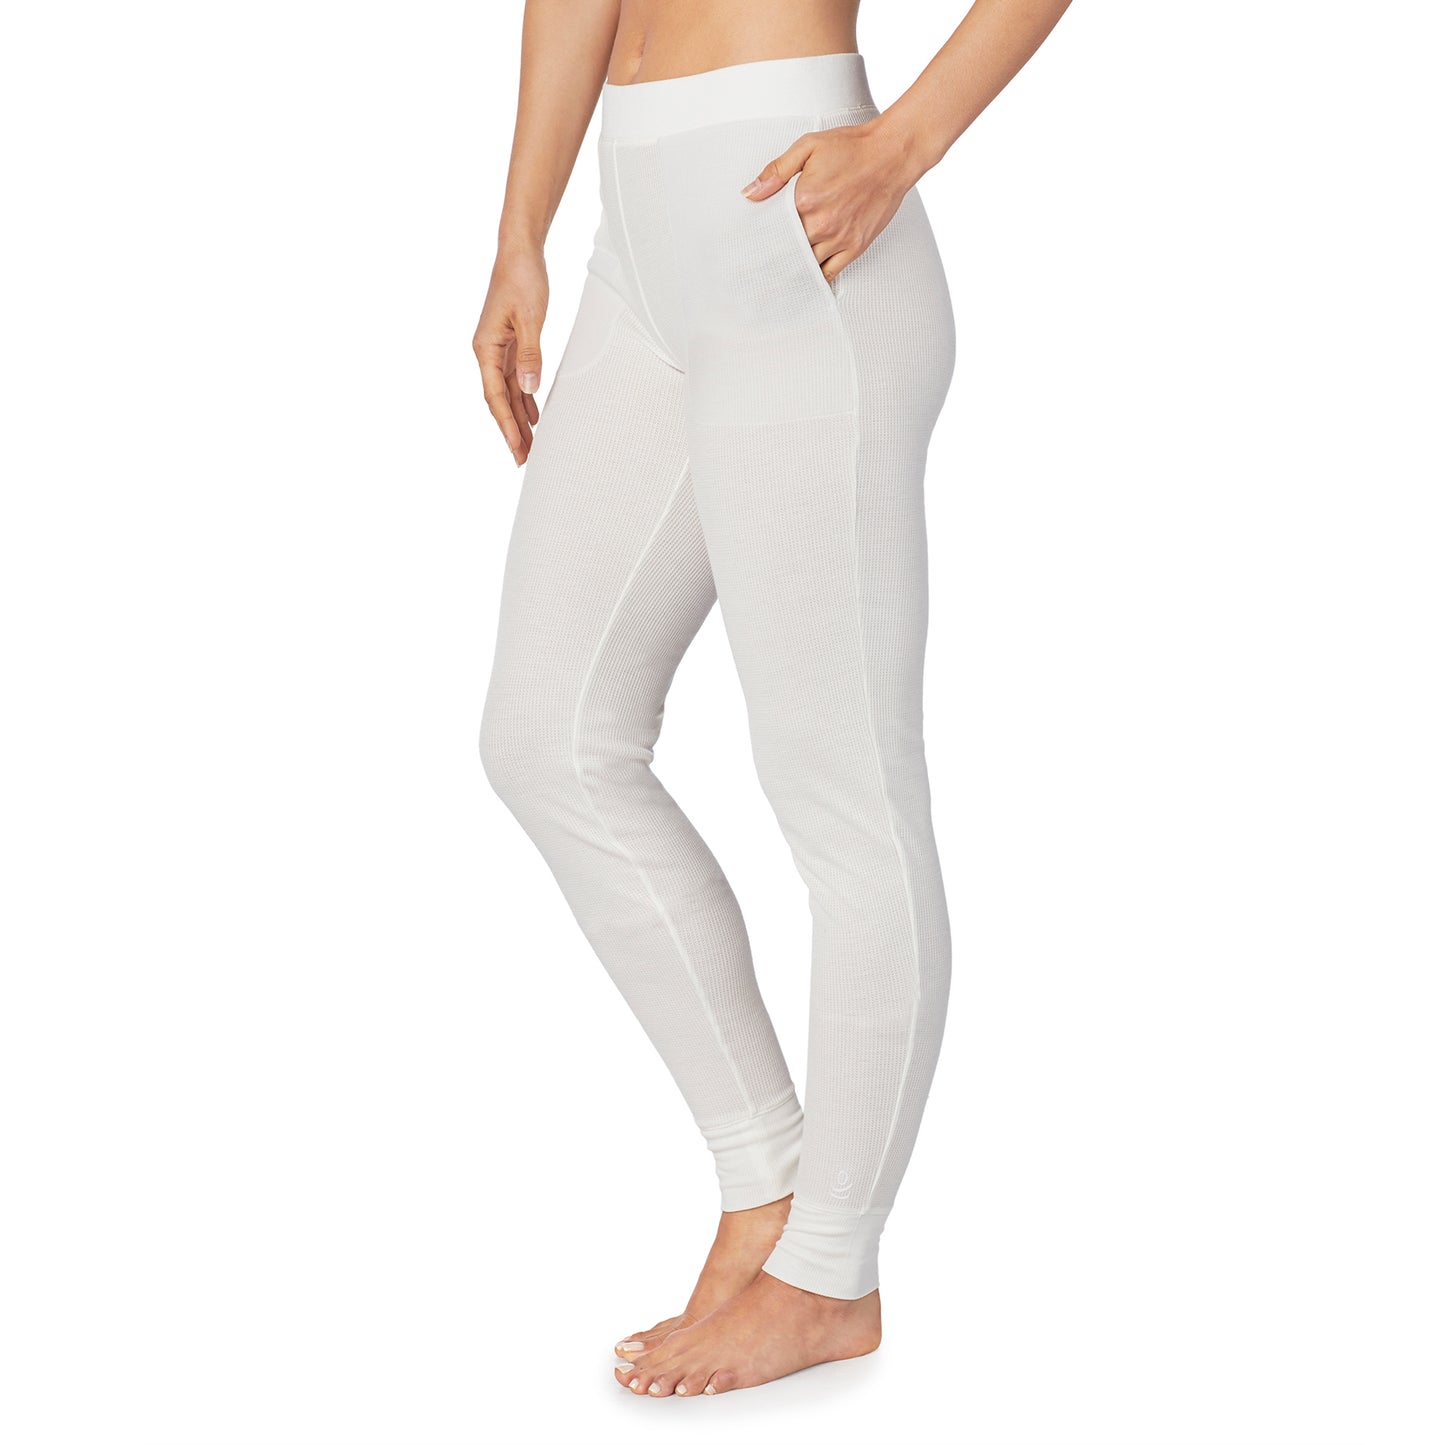  Ivory;Model is wearing size S. She is 5’9”, Bust 32”, Waist 25.5”, Hips 36”.@A lady wearing a ivory legging.